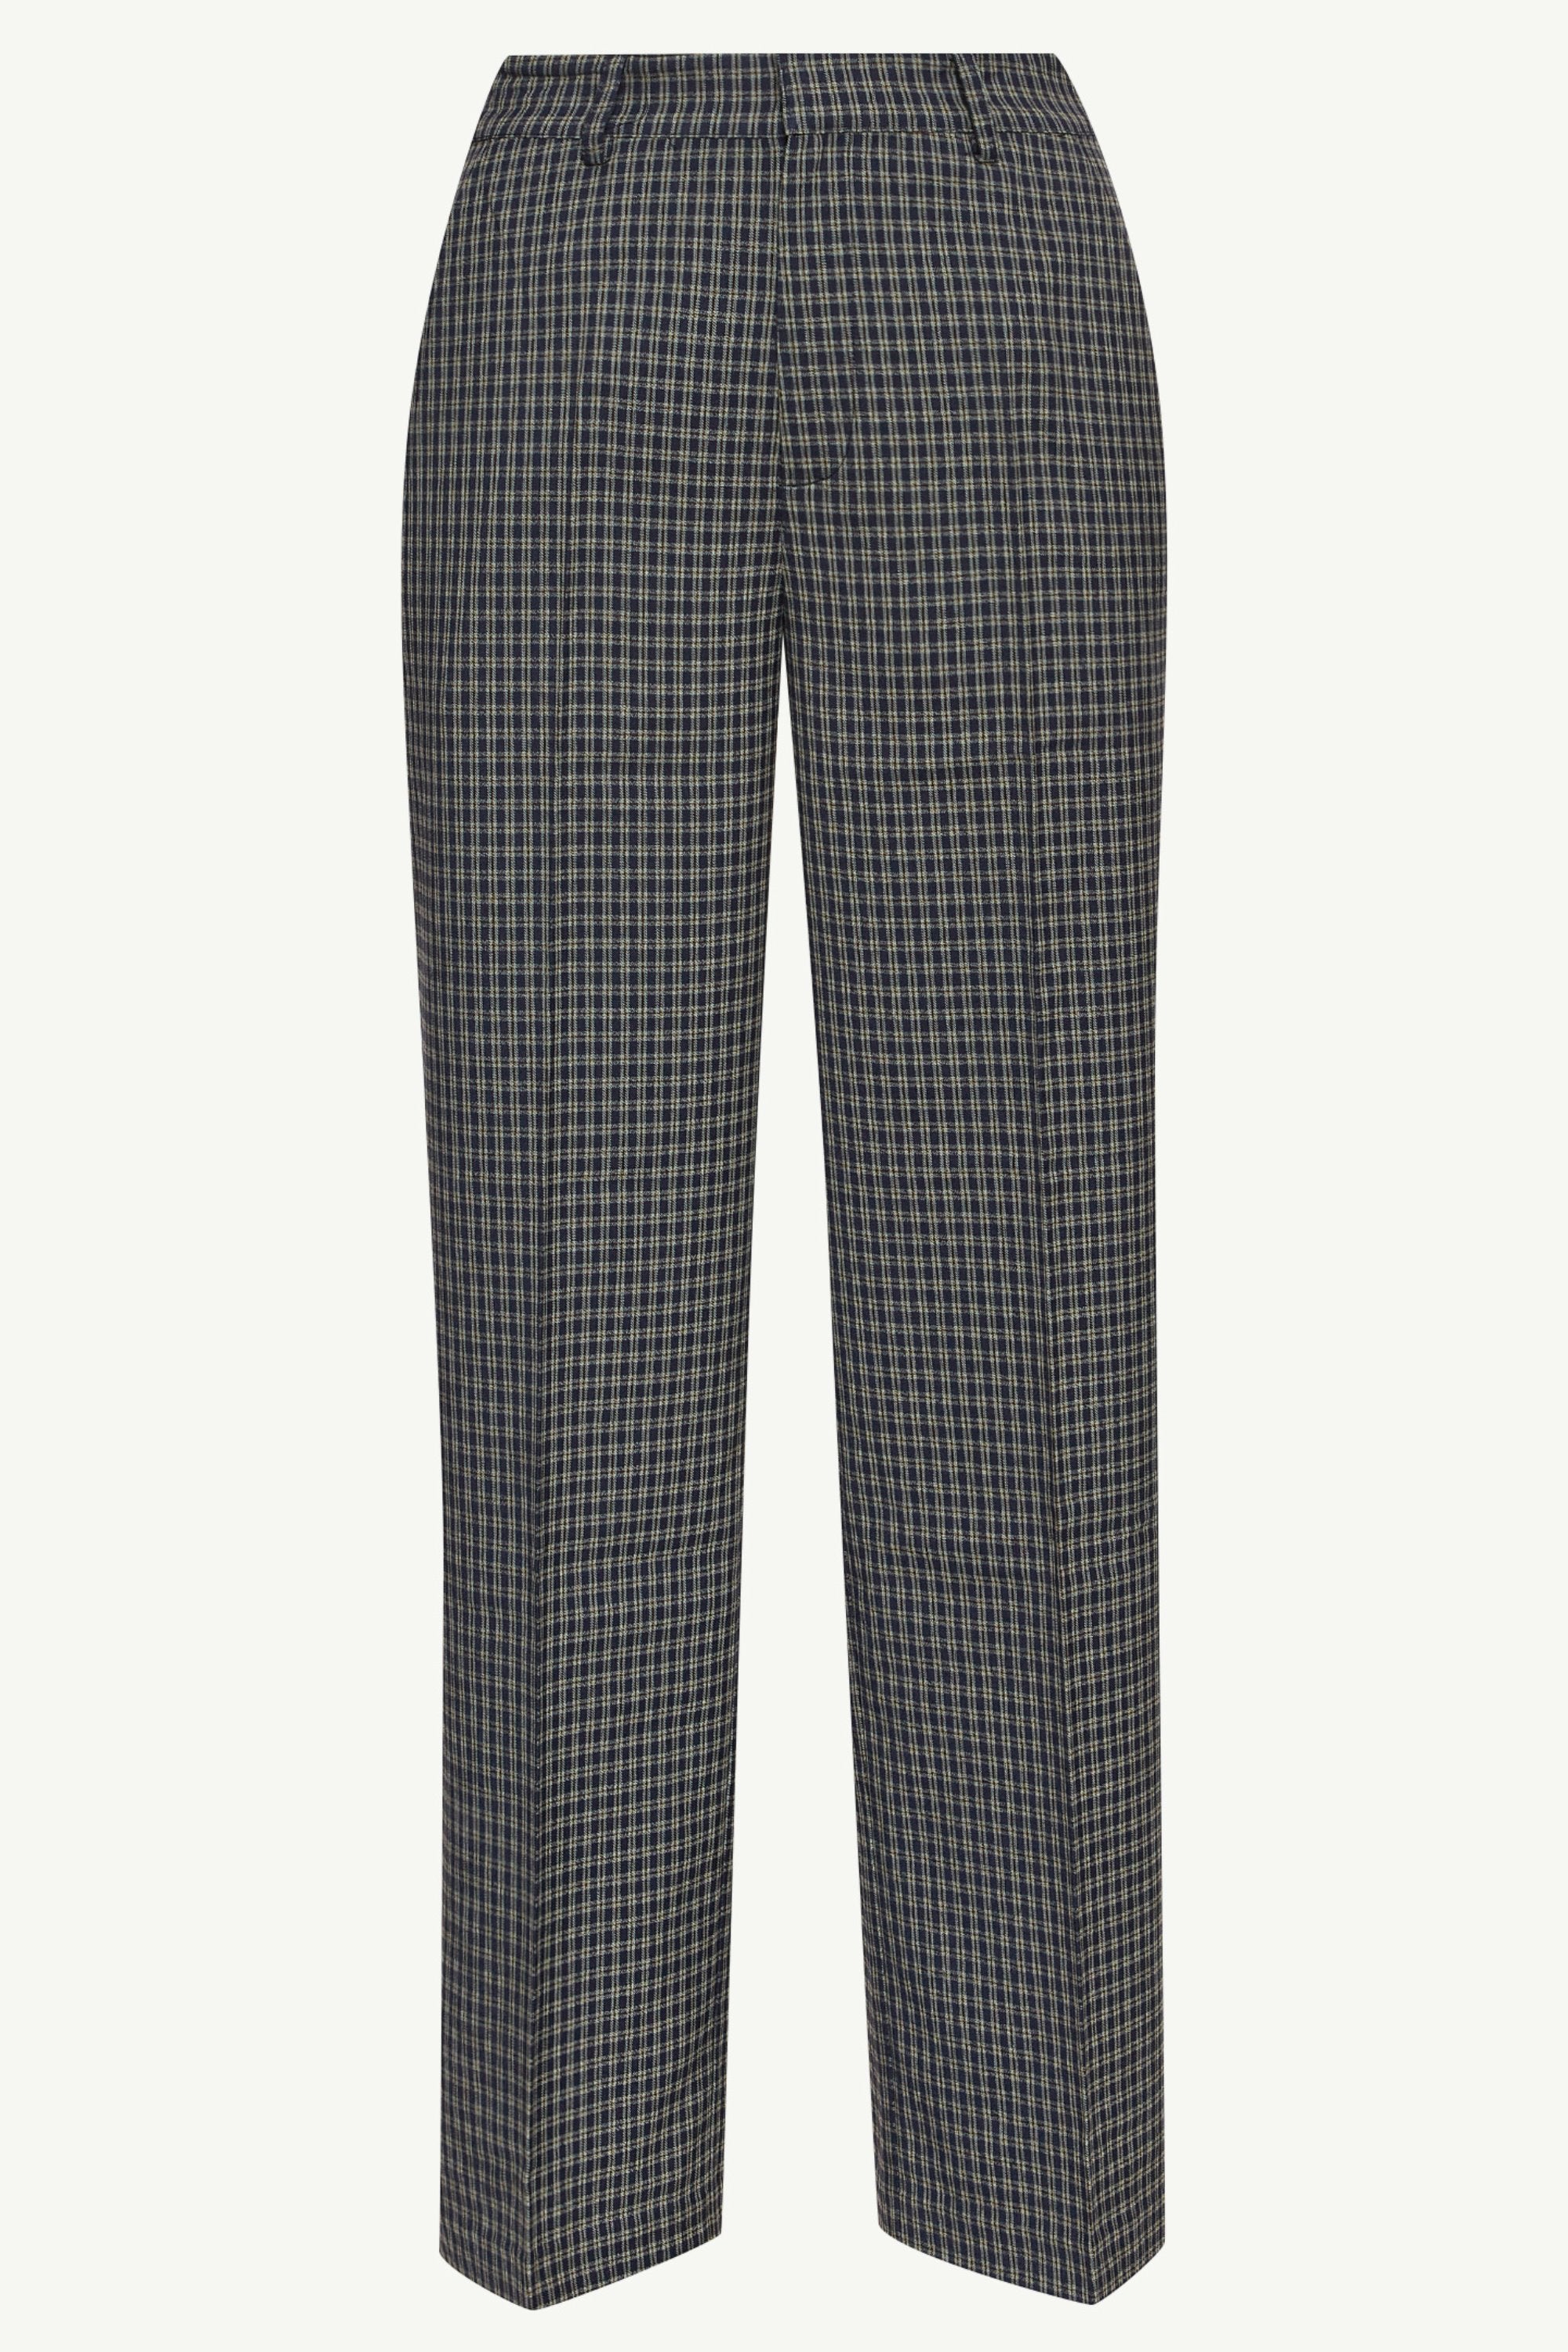 Checkered Blue Wide Leg Pants Clothing Veiled 